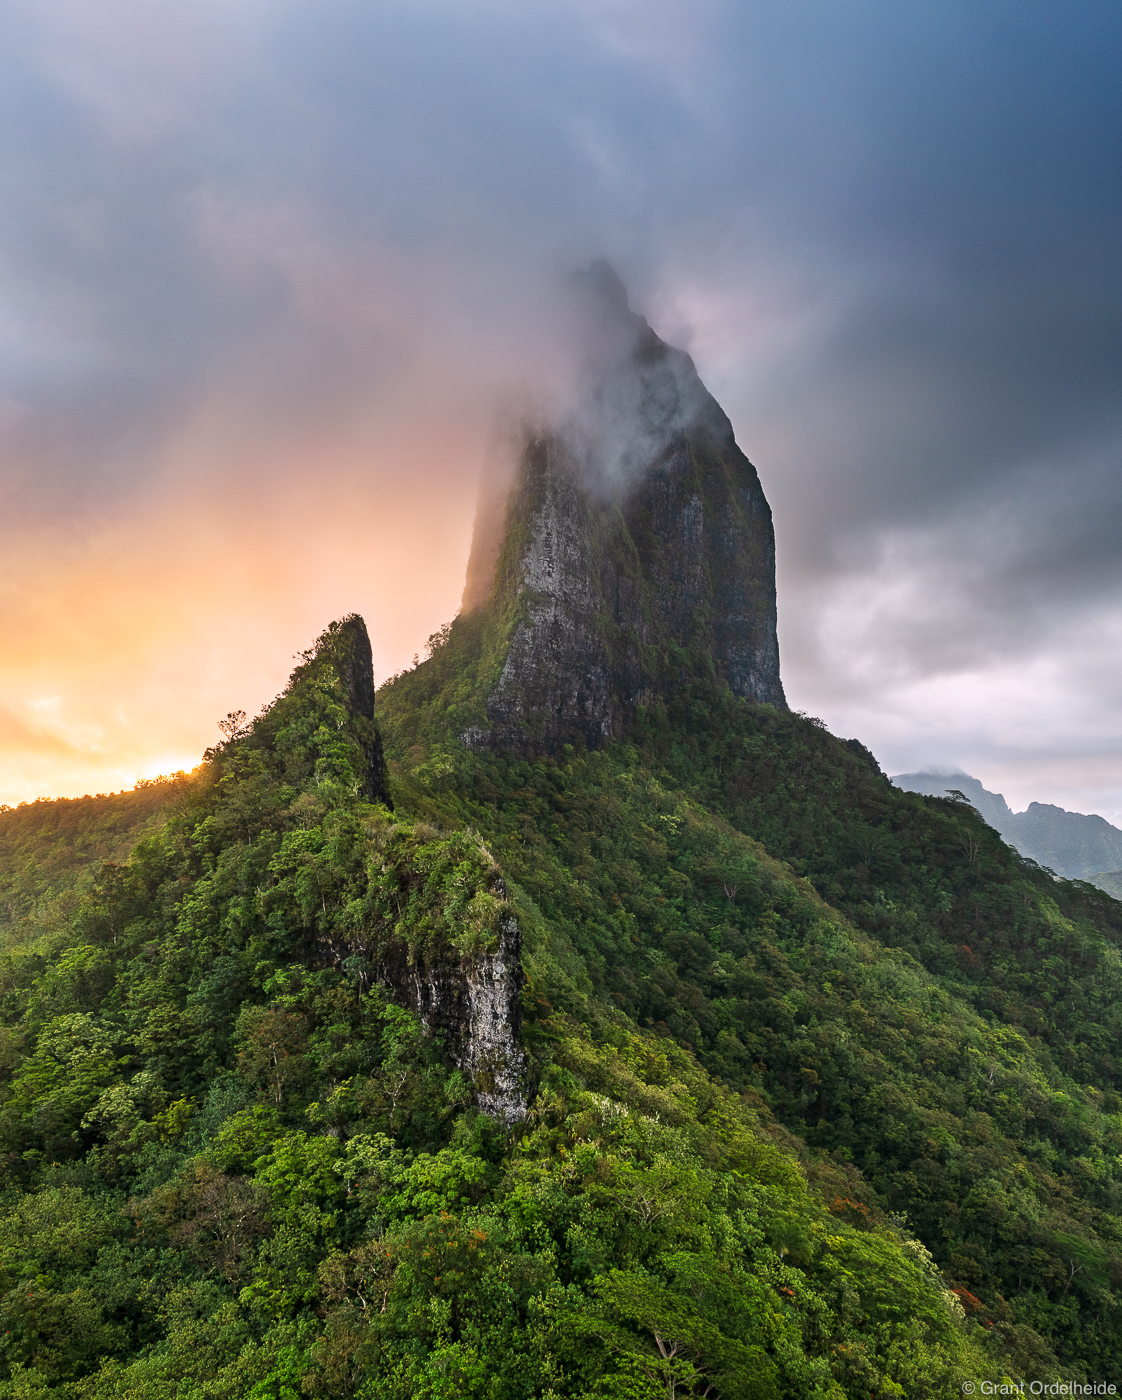 A stormy sunset over the rugged peaks of the island of Moorea.